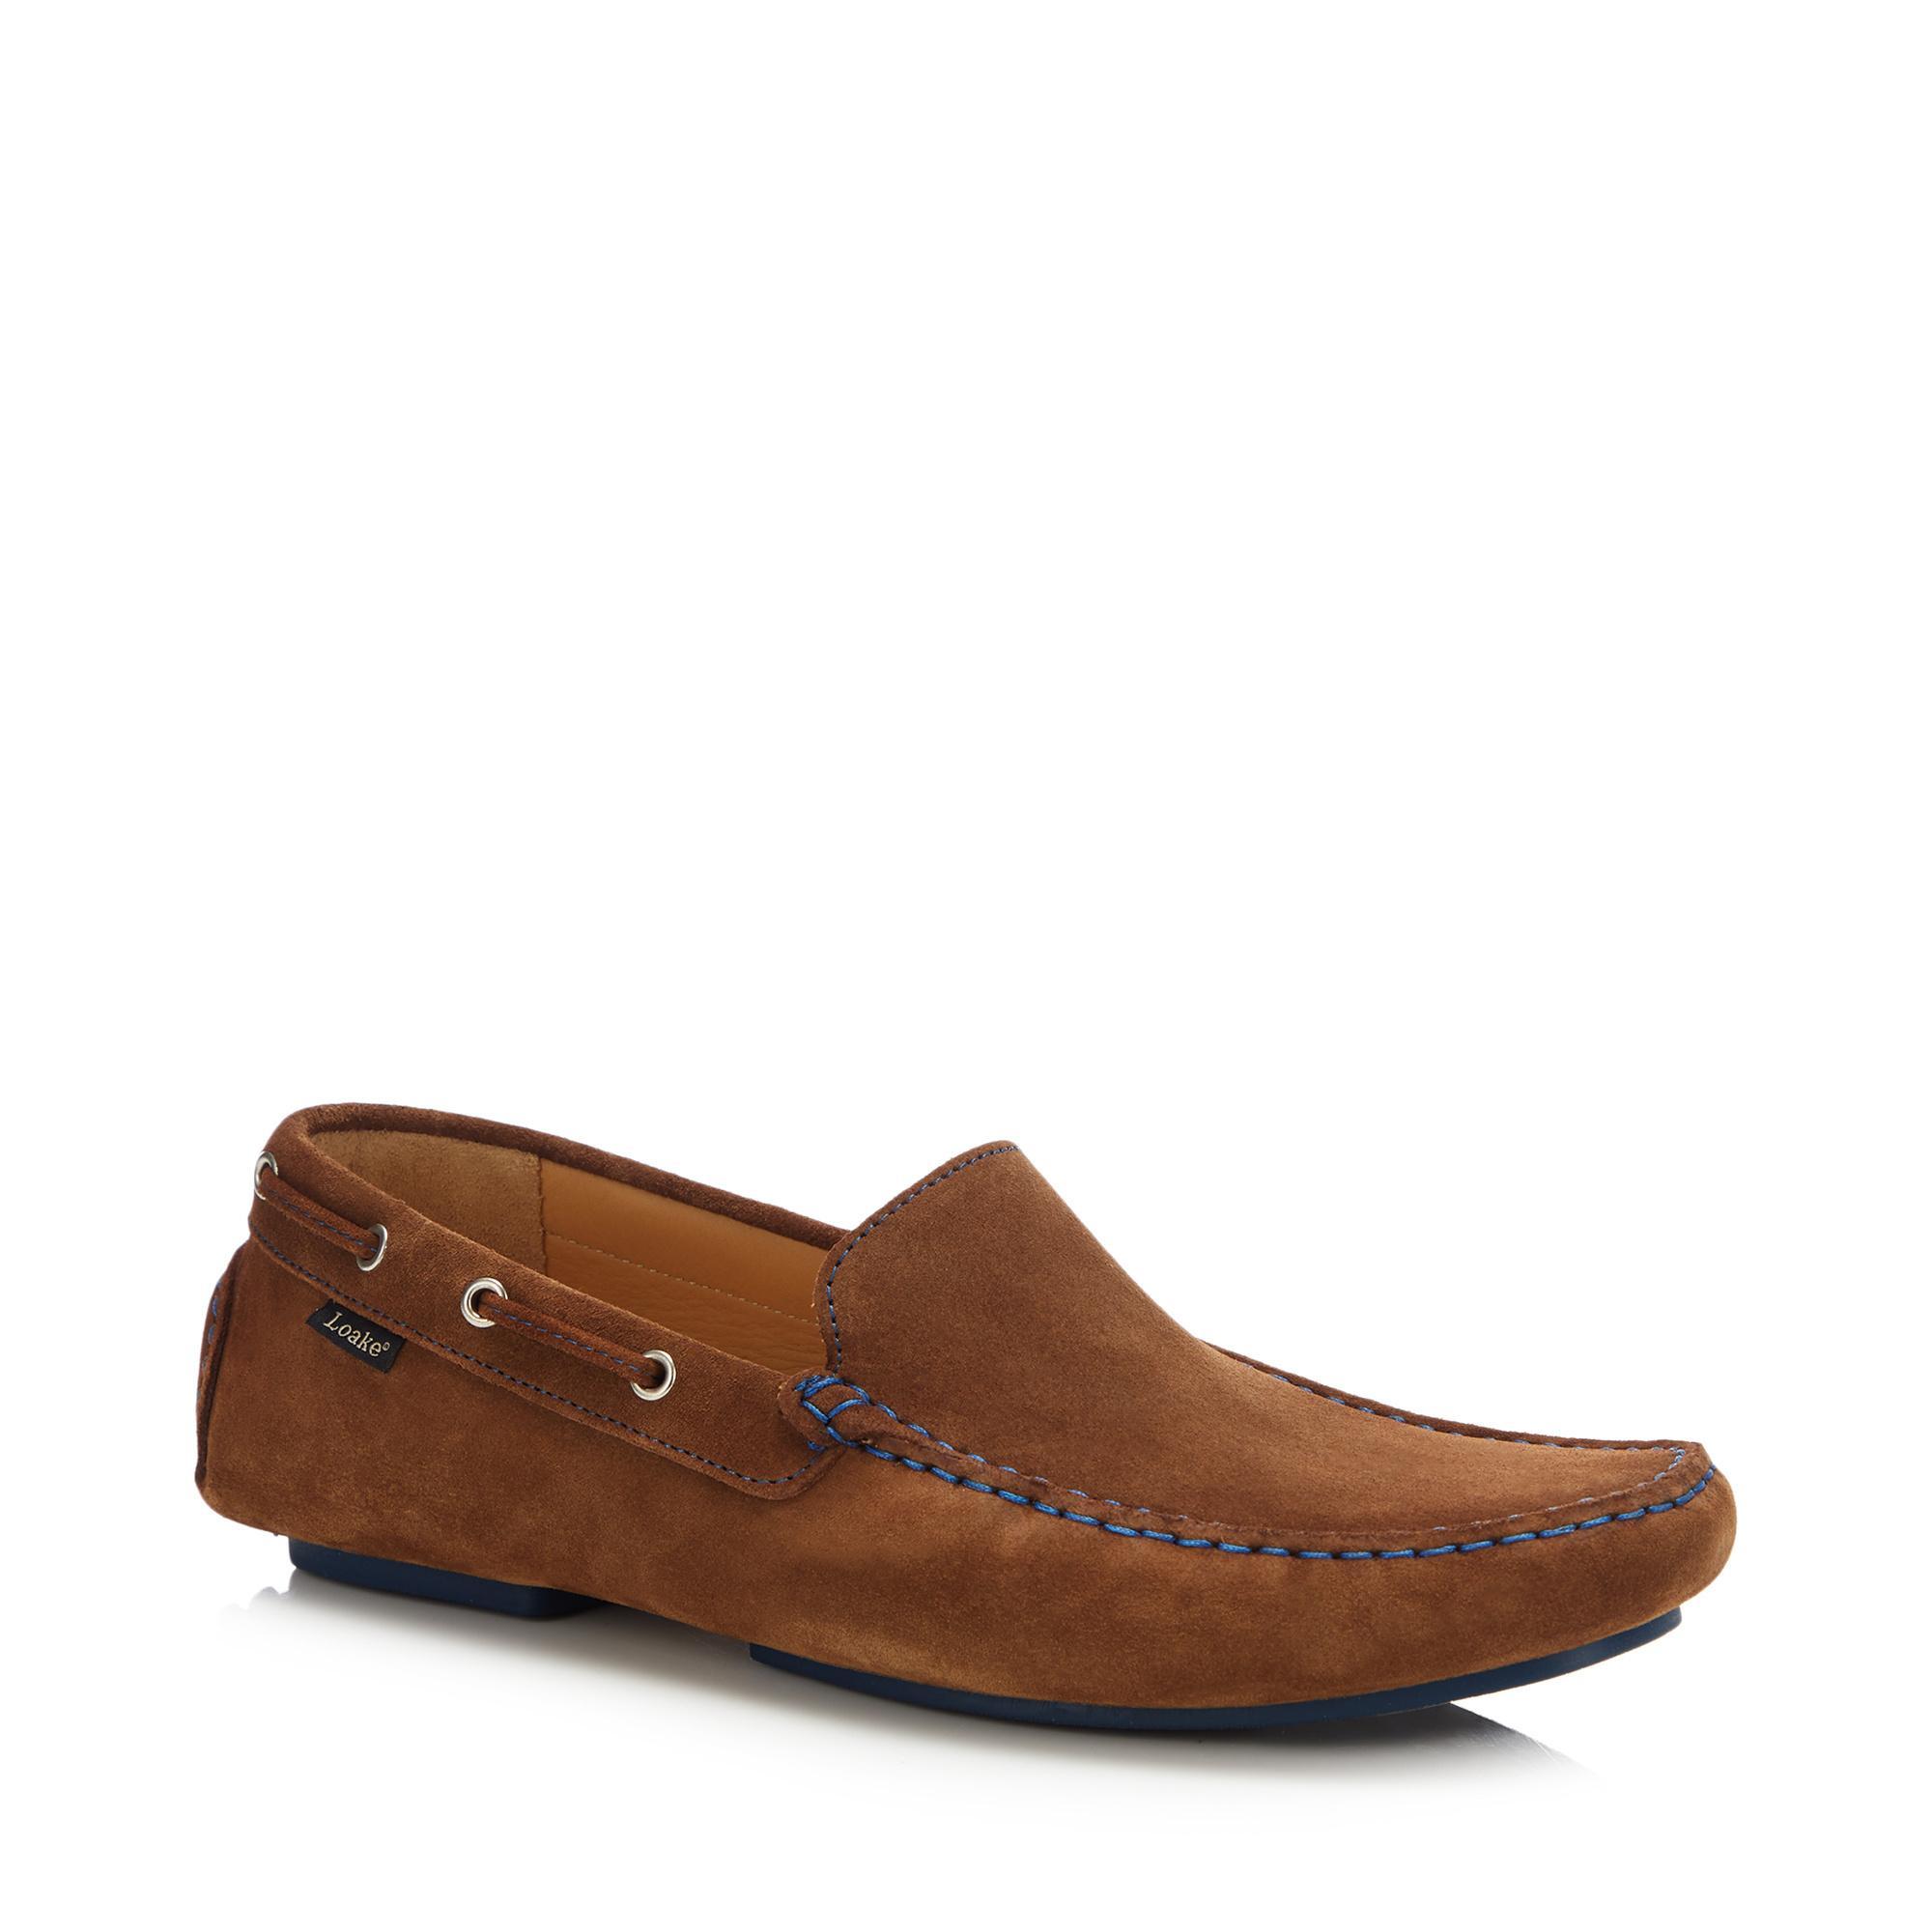 Loake Men's Suede 'nicholson' Loafers in Tan (Brown) for Men - Lyst